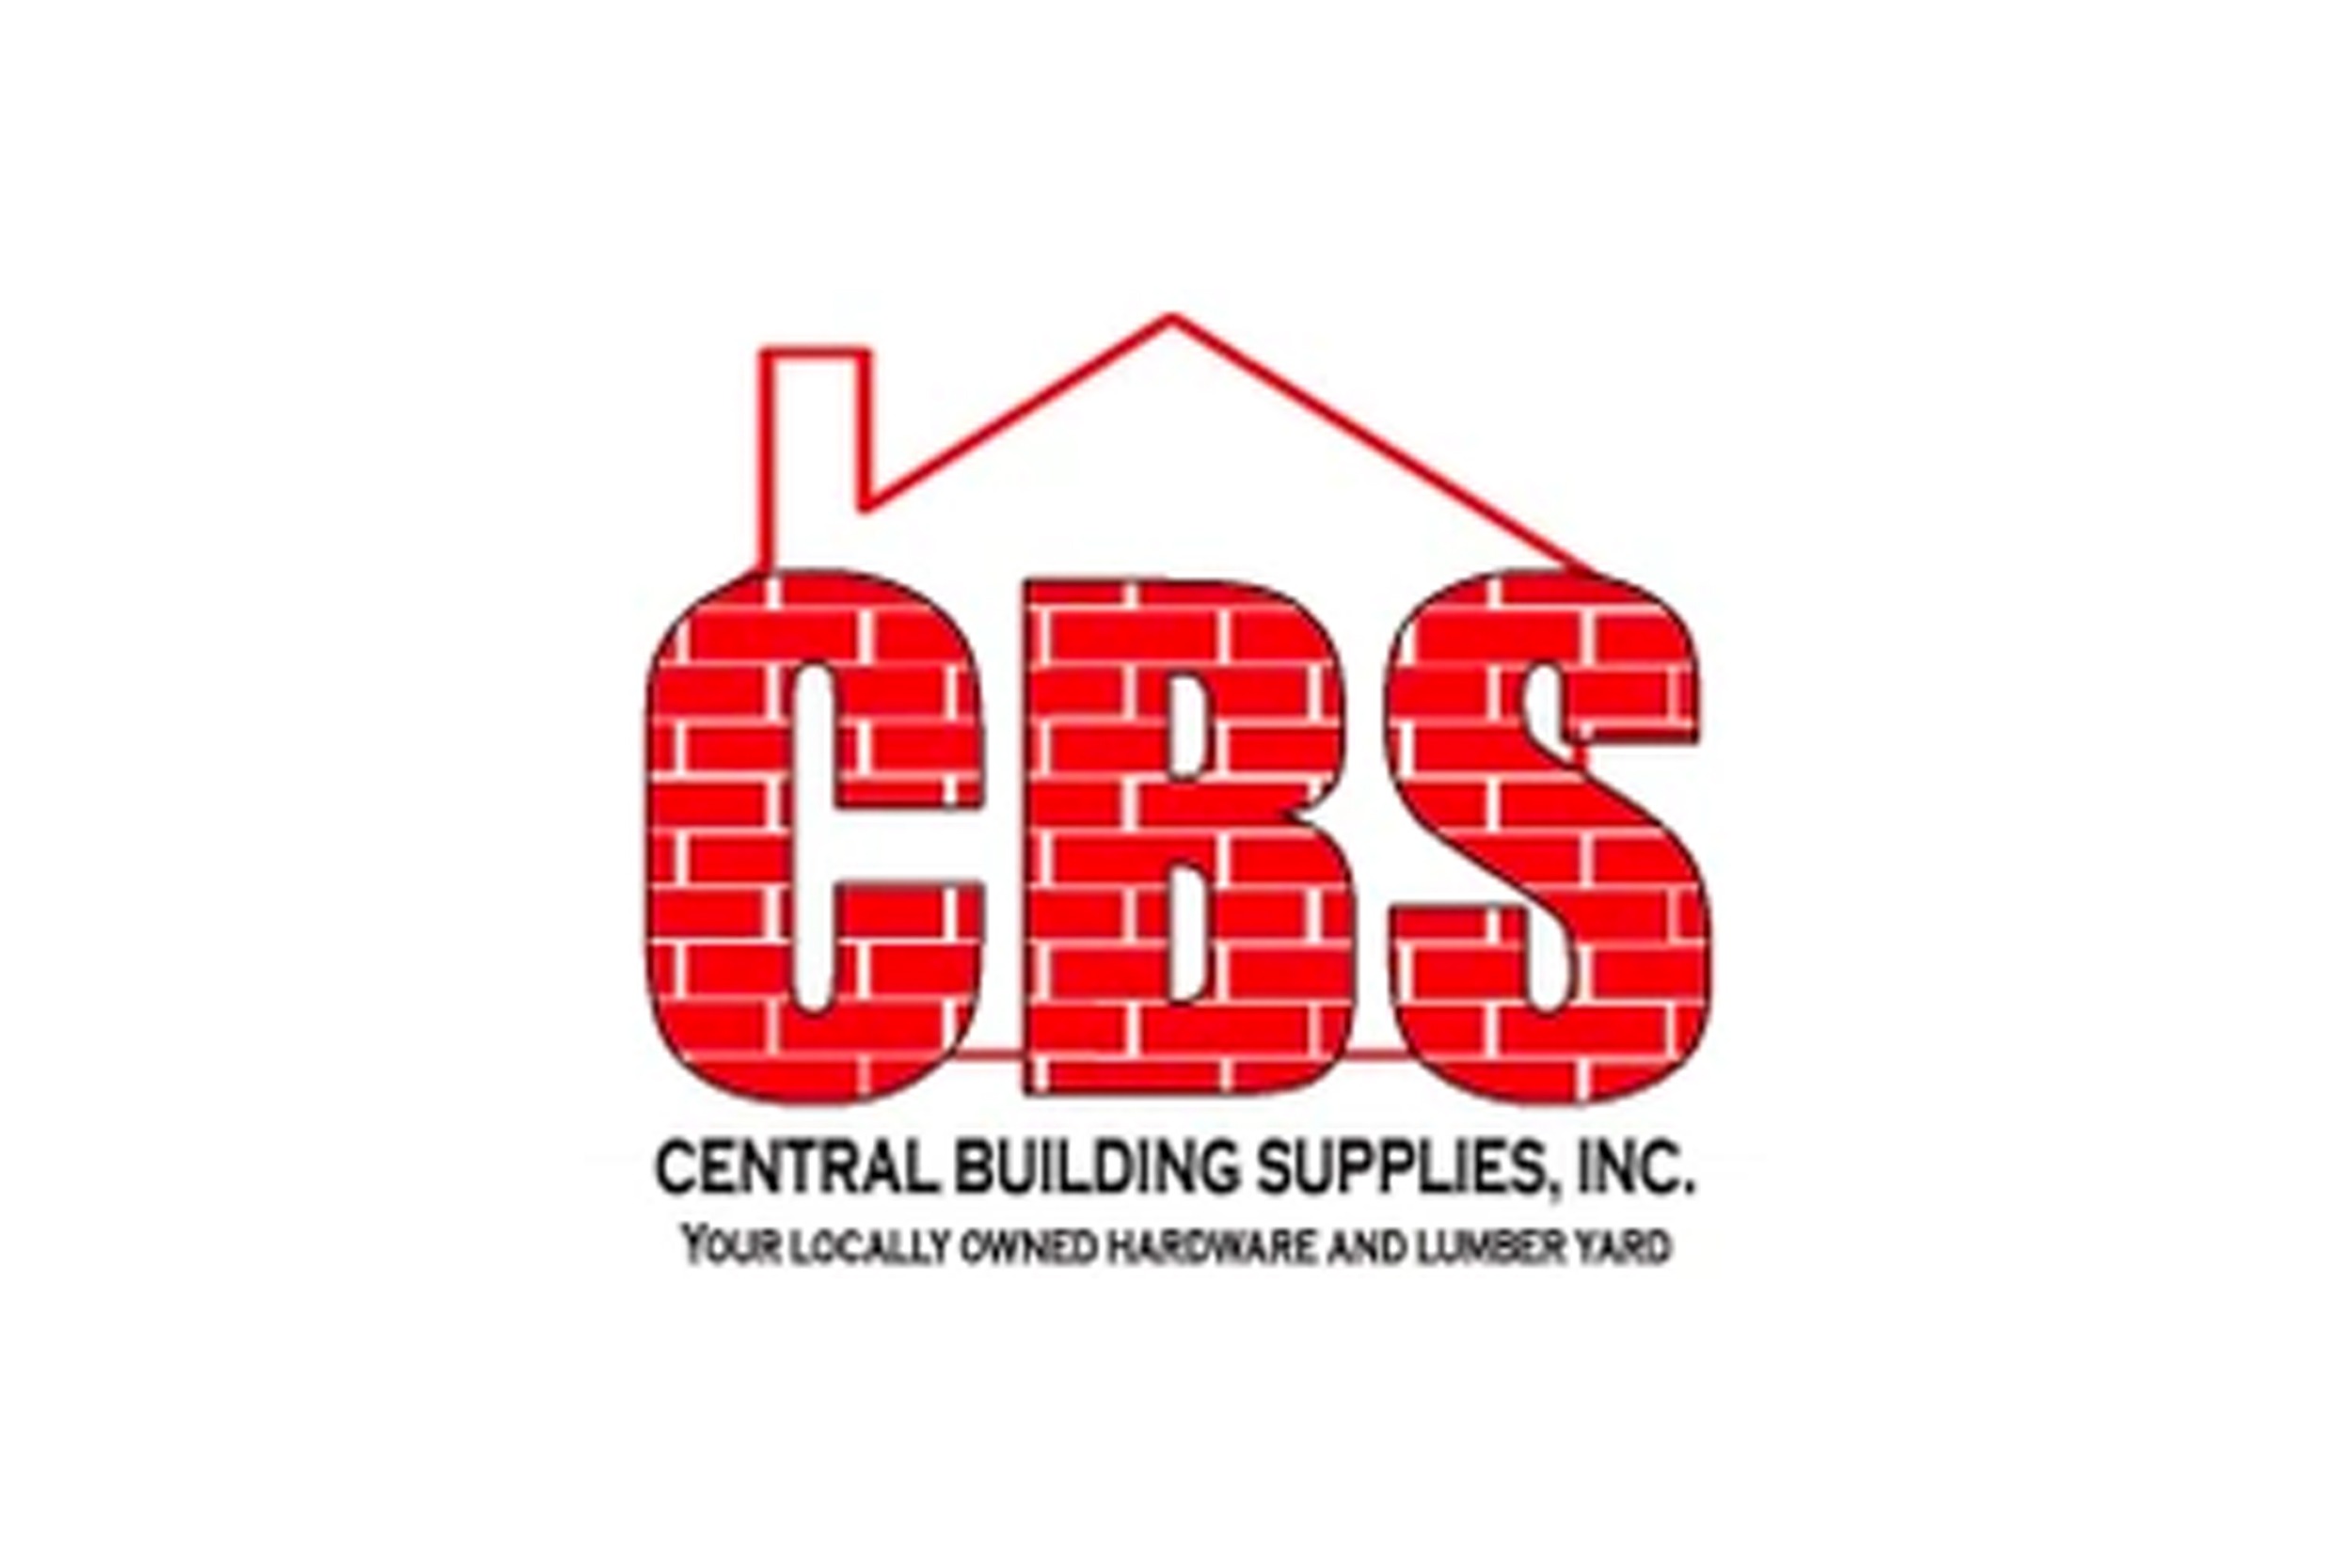 Discover the wide range of building materials and services offered by Central Building Supply. From lumber and power tools to plumbing supplies and paint, they are your comprehensive hardware and lumber yard. Read our review to learn more about their offerings and exceptional customer service. Partner with Gott Marketing for all your marketing needs in the building supply industry.